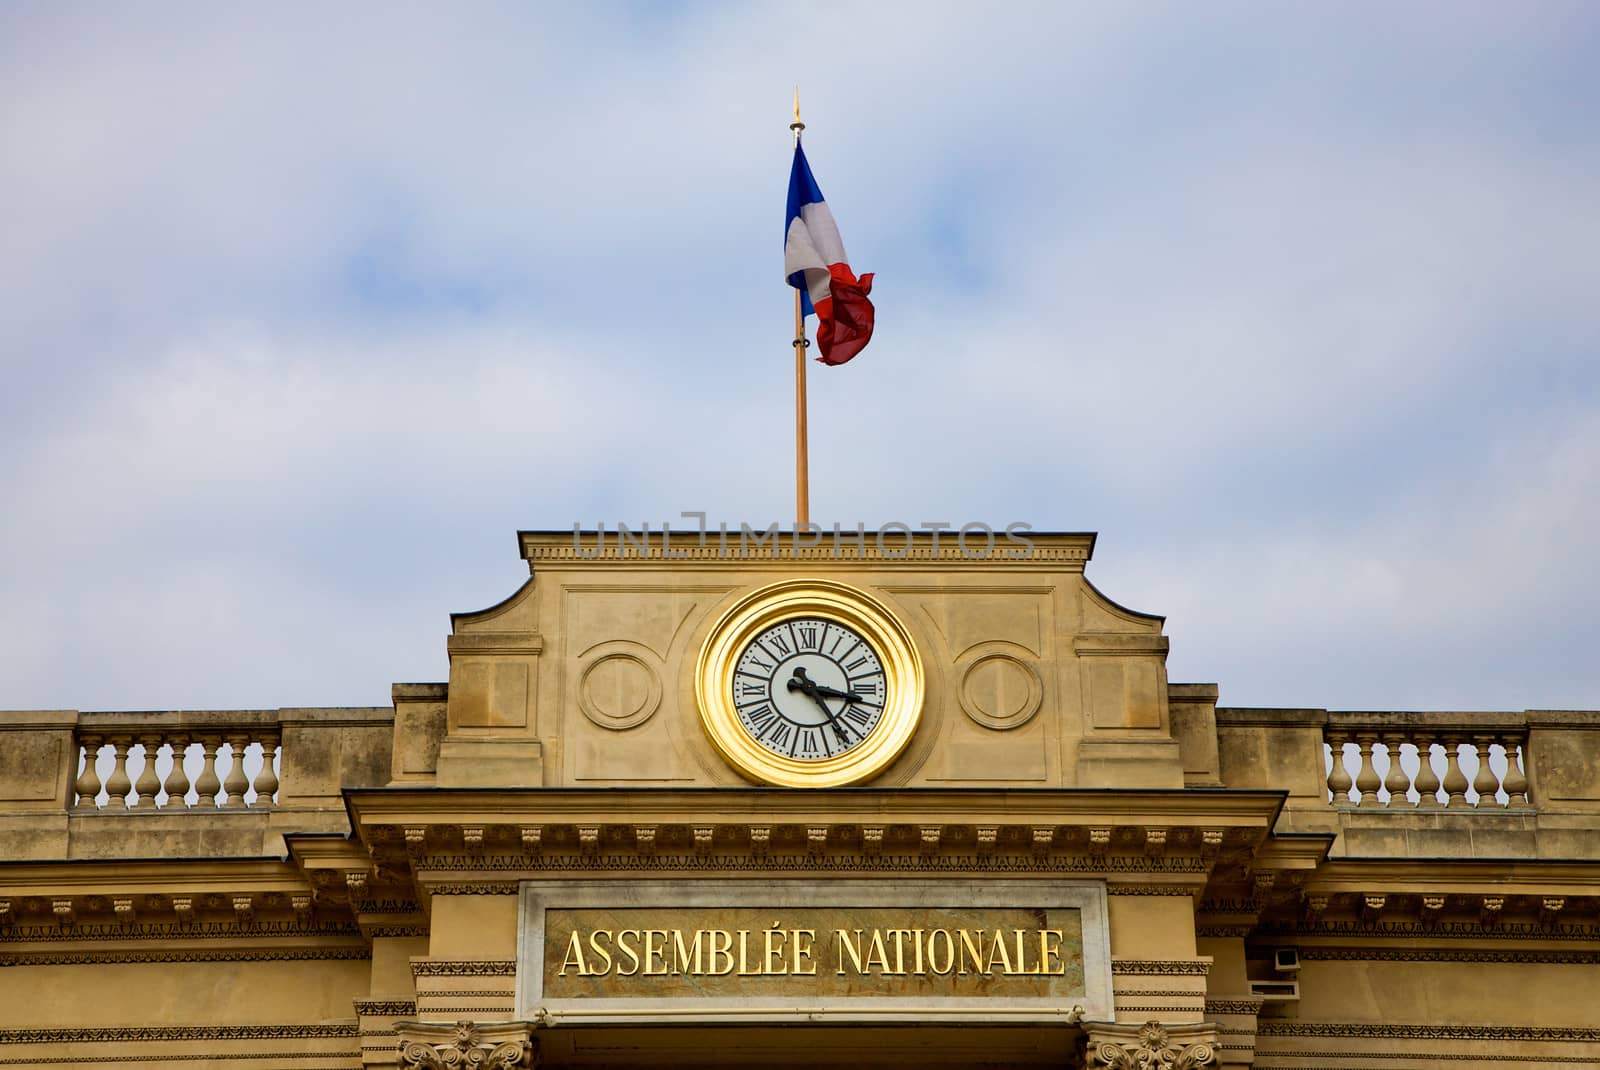 National Assembly Paris by watchtheworld